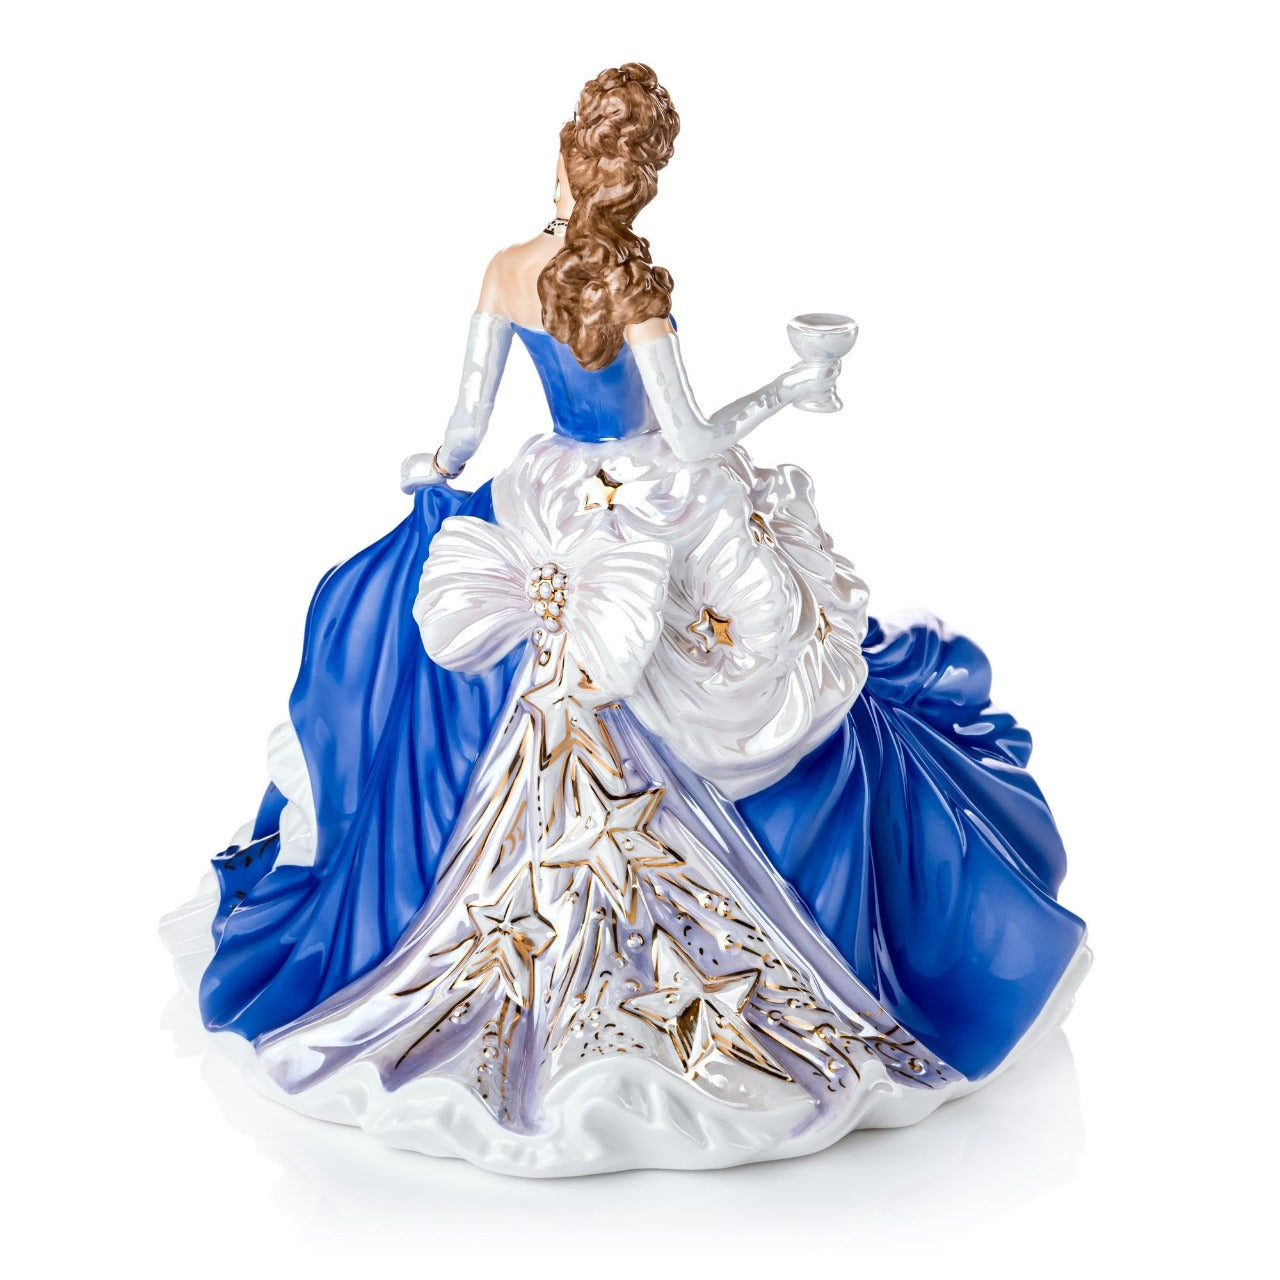 English Ladies Congratulations Sapphire  English Ladies Company have added another figurine to our ever-growing Congratulations range in our English Ladies collection. This time it’s Congratulations Sapphire. With this range being one of our best sellers we knew we had to bring you another colourway.